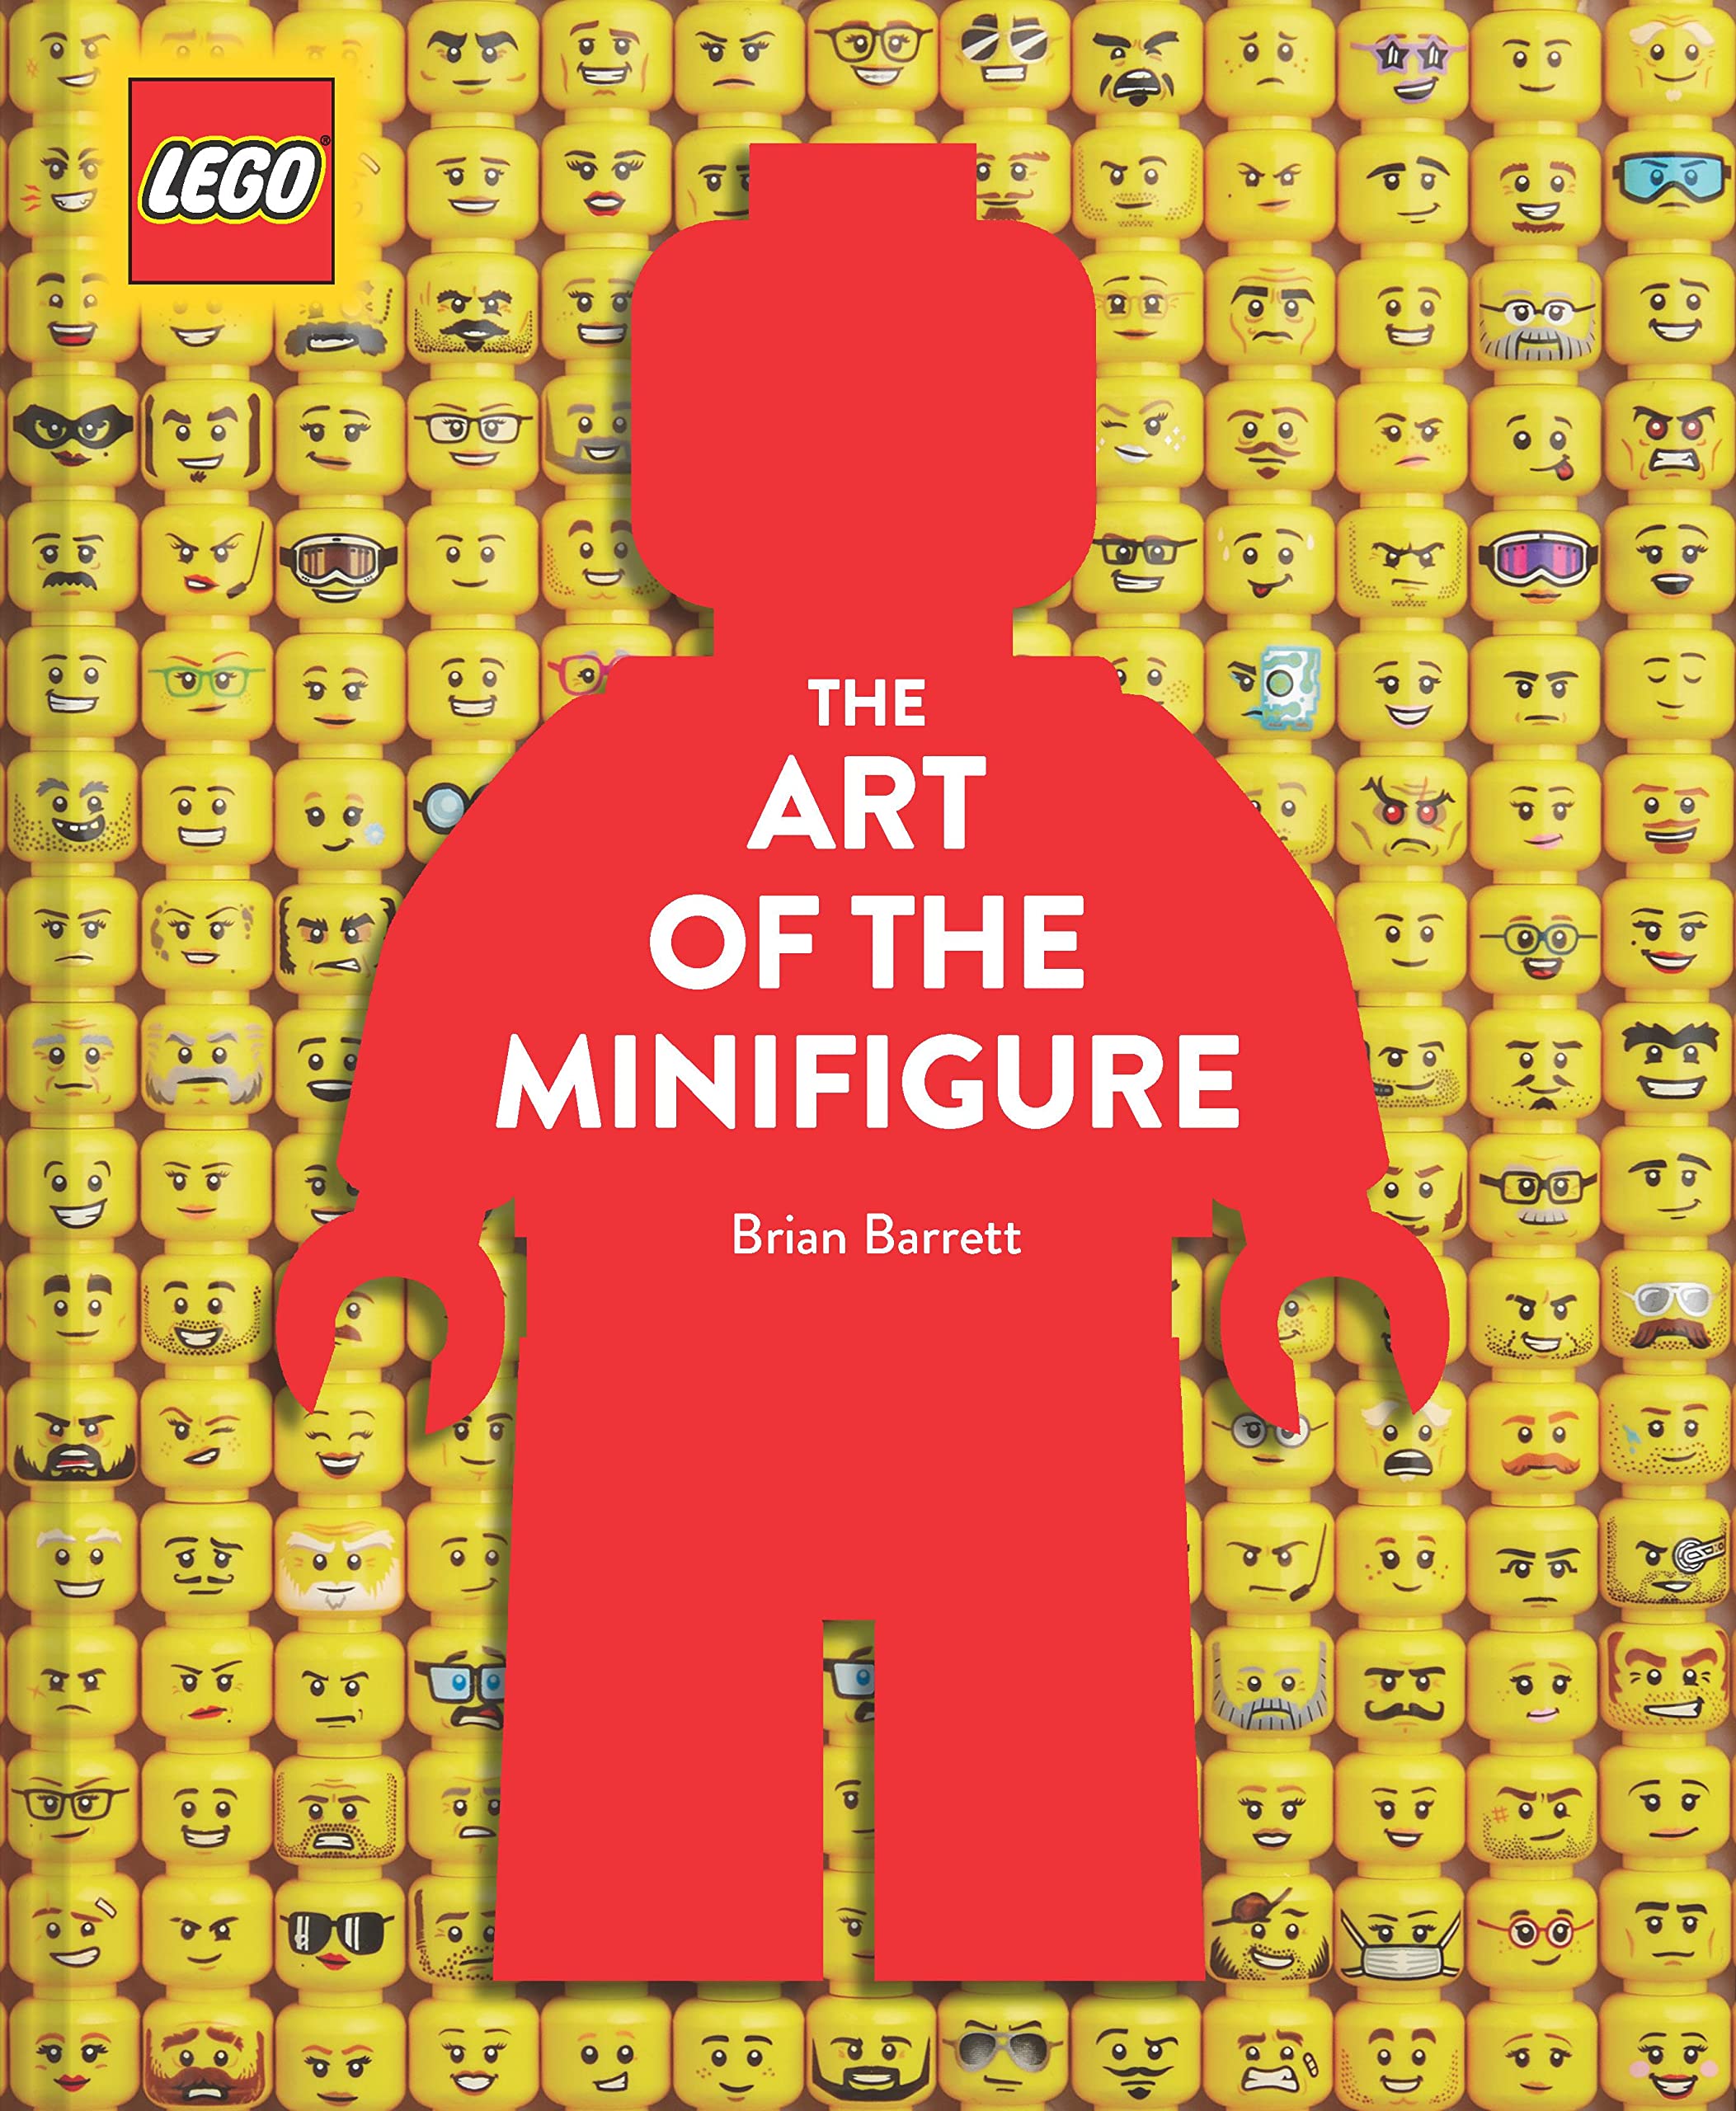 Lego the Art of the Minifigure (Hardcover)